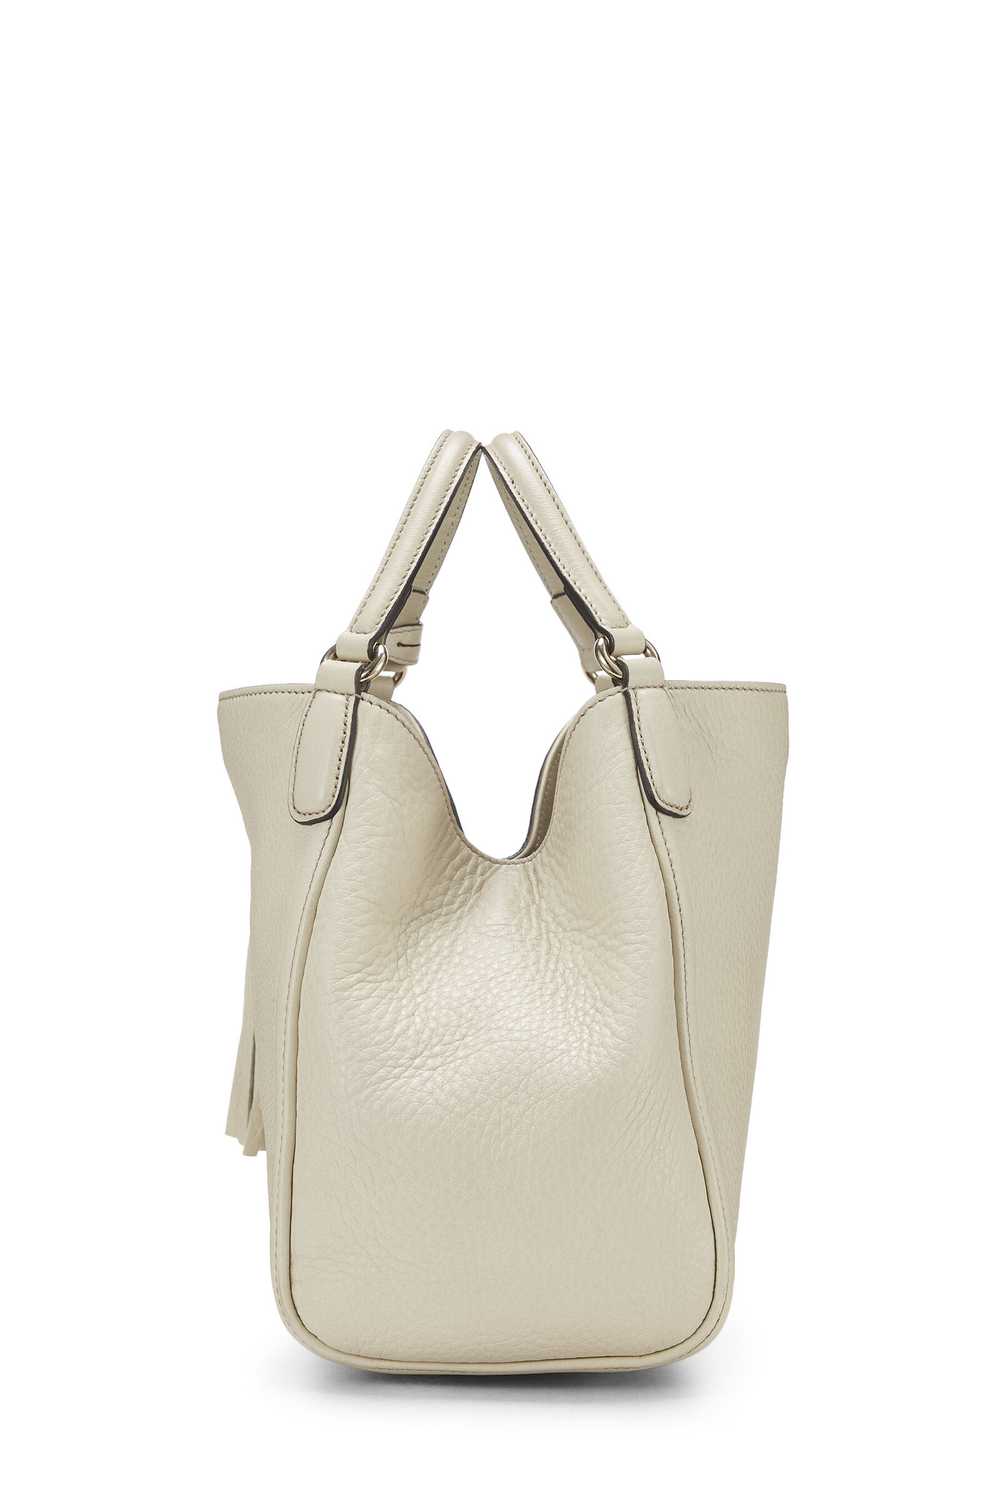 White Leather Soho Convertible Shoulder Bag Small - image 3